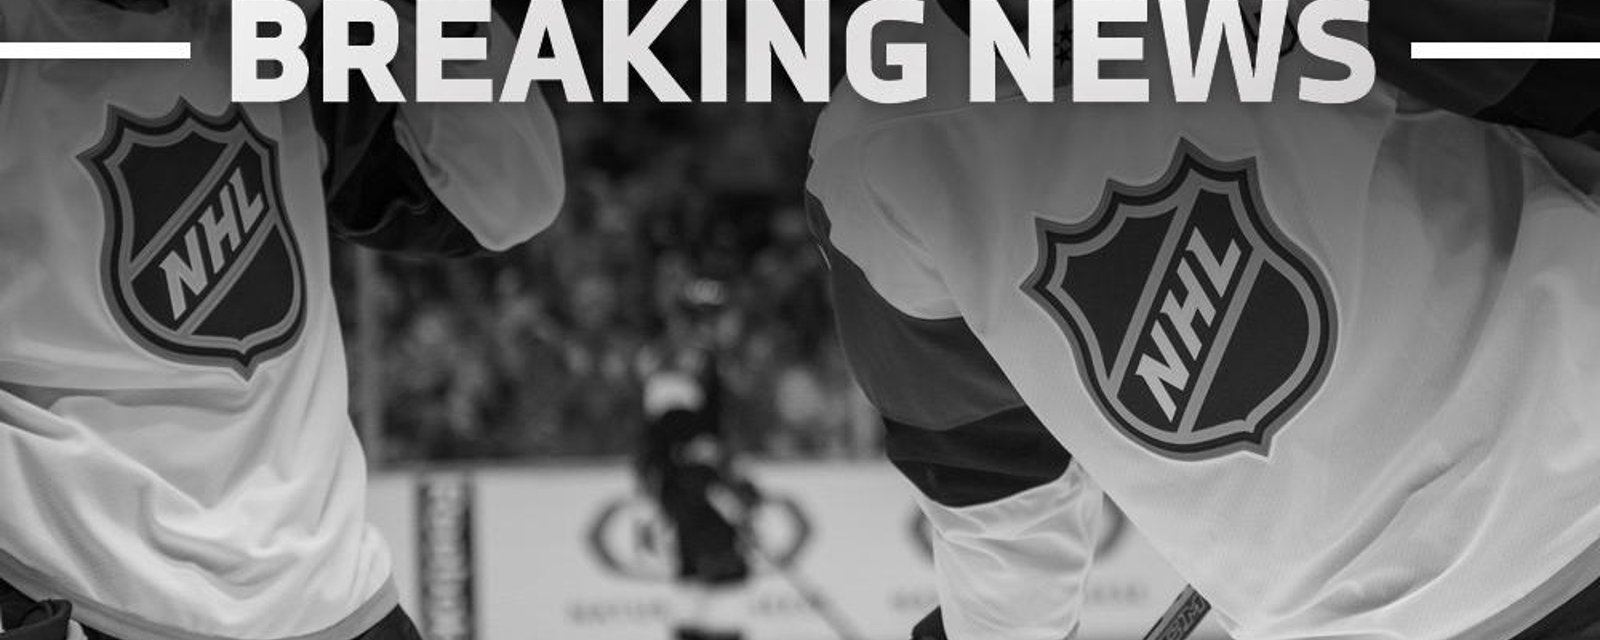 Breaking: Young NHL star appears to be seriously injured in practice.